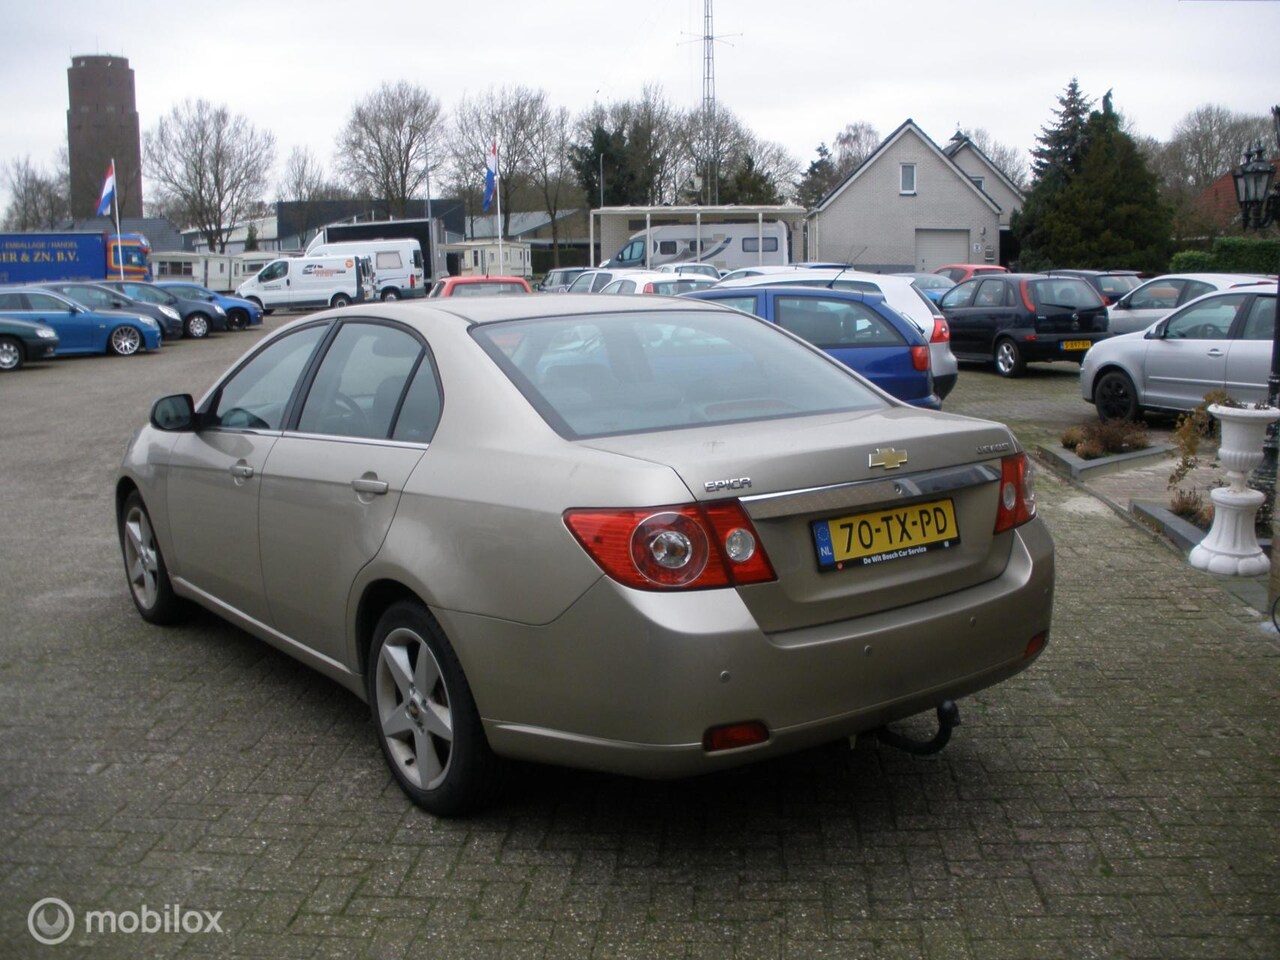 Chevrolet Epica - 2.5i Executive automaat lm wielen airco